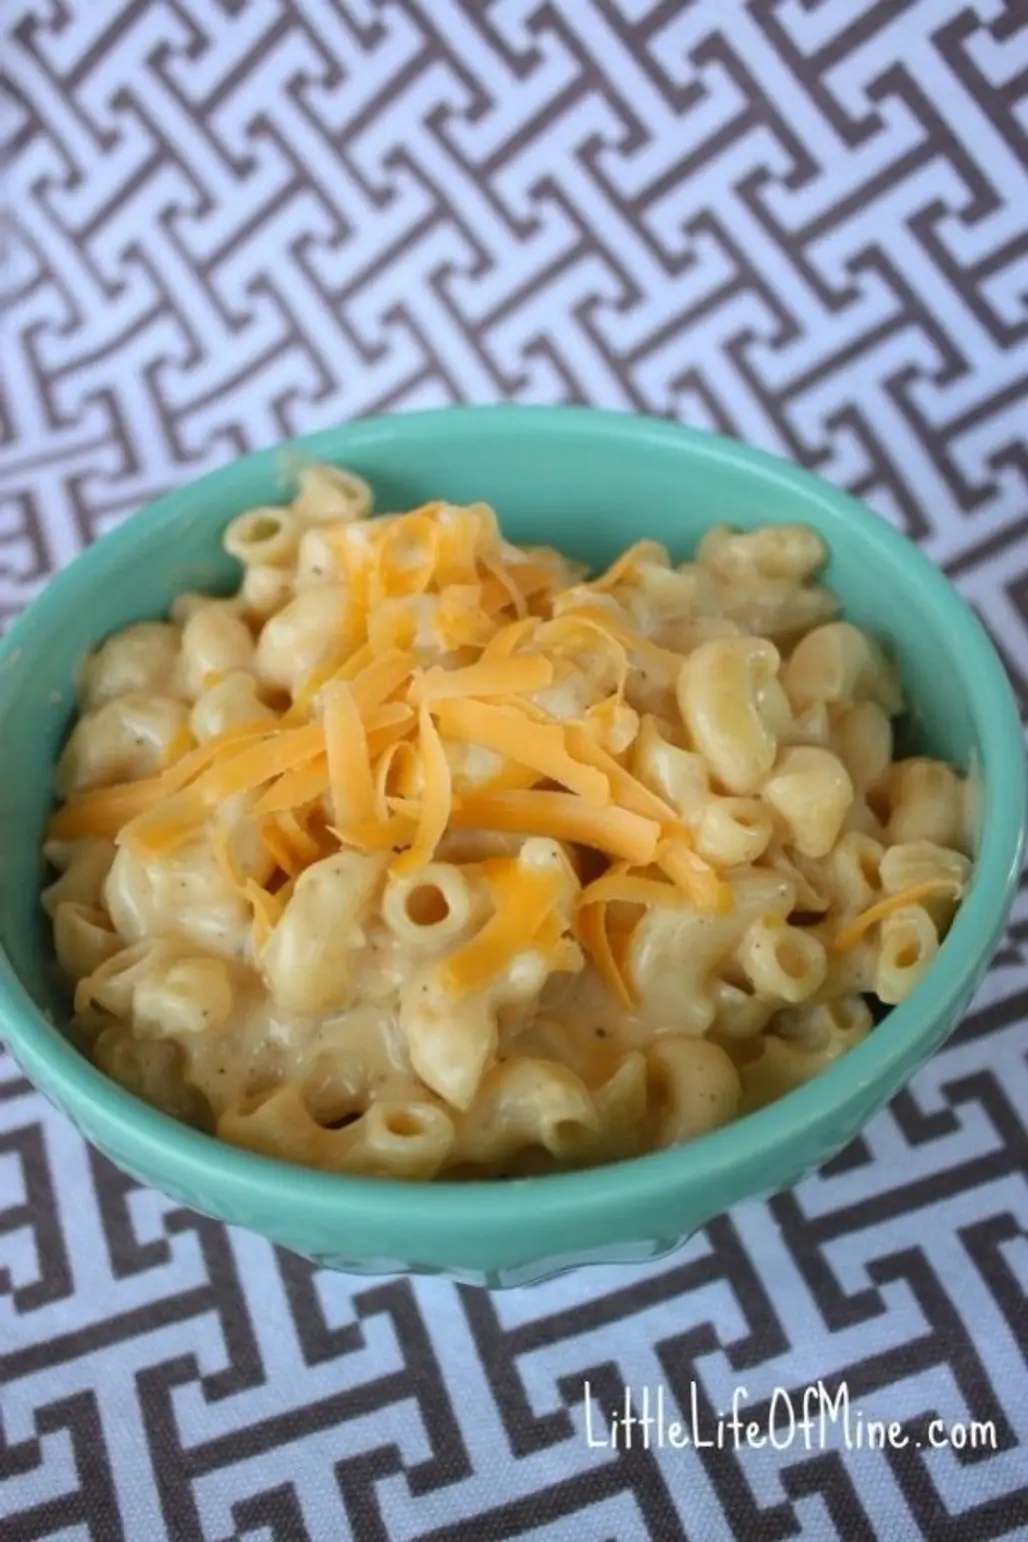 Top with Cheese